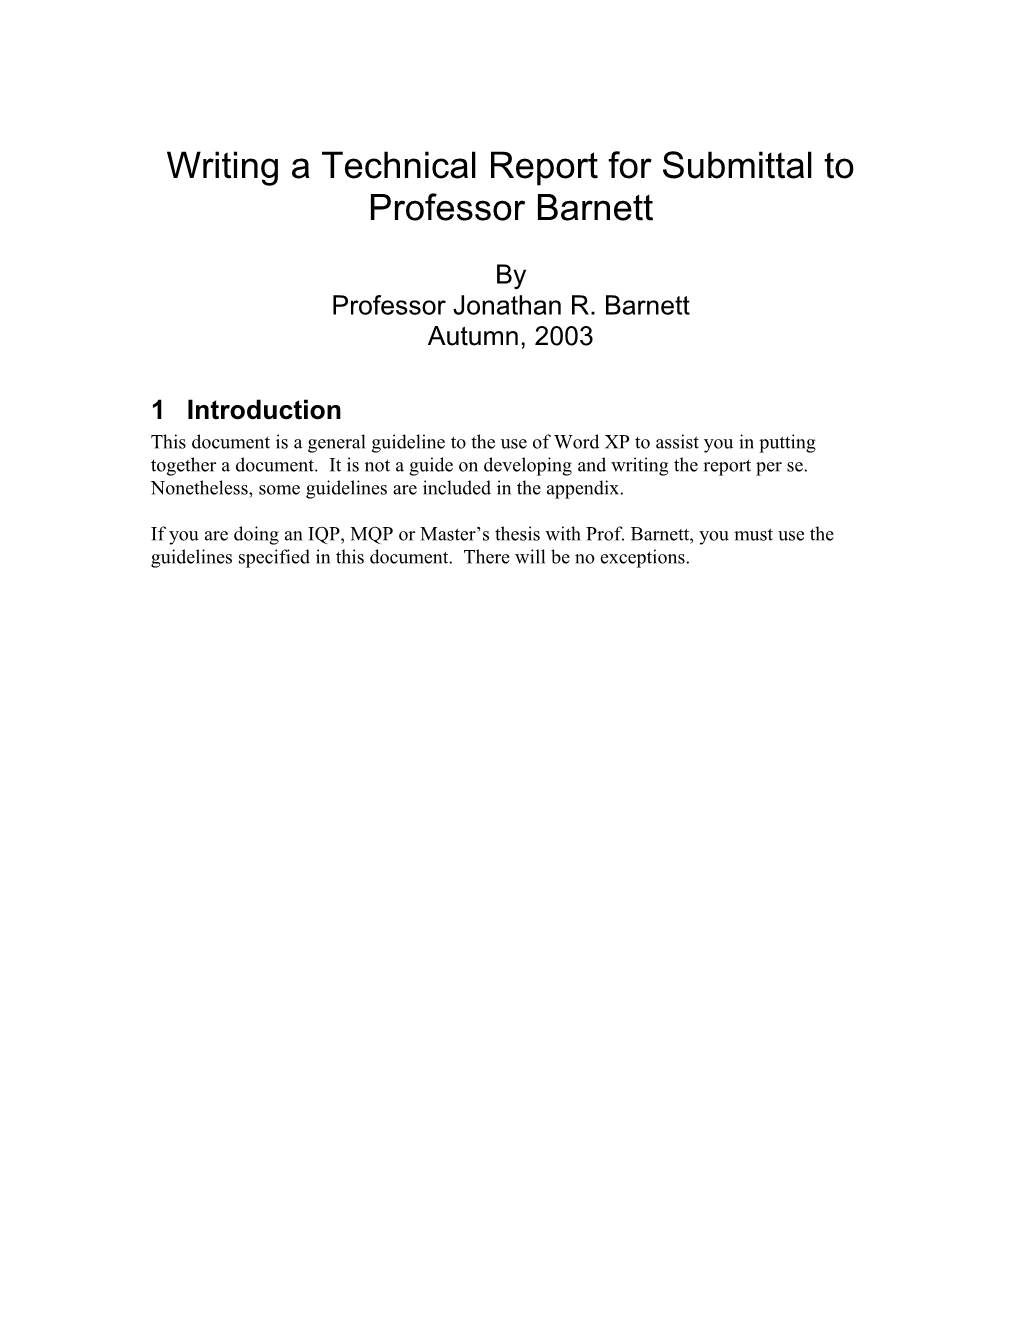 Writing a Technical Report